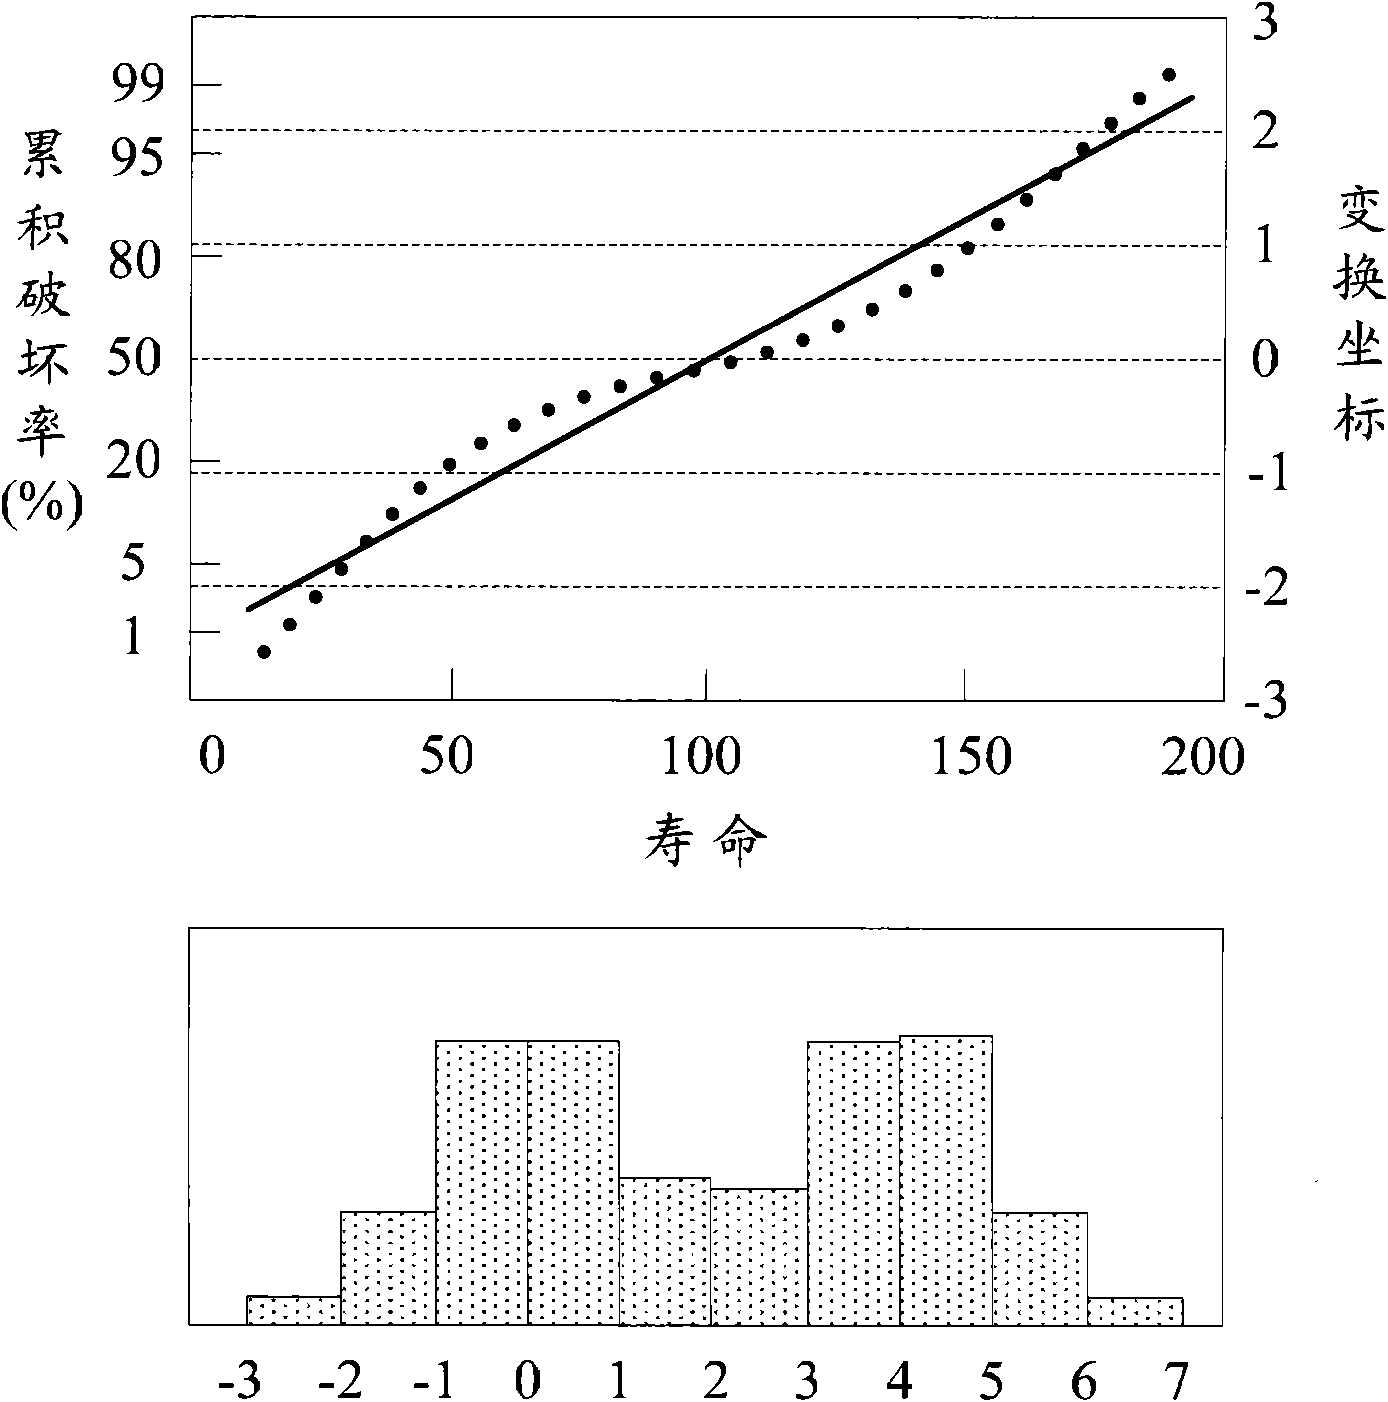 Method and device for detecting non-unimodal distribution of measurement data